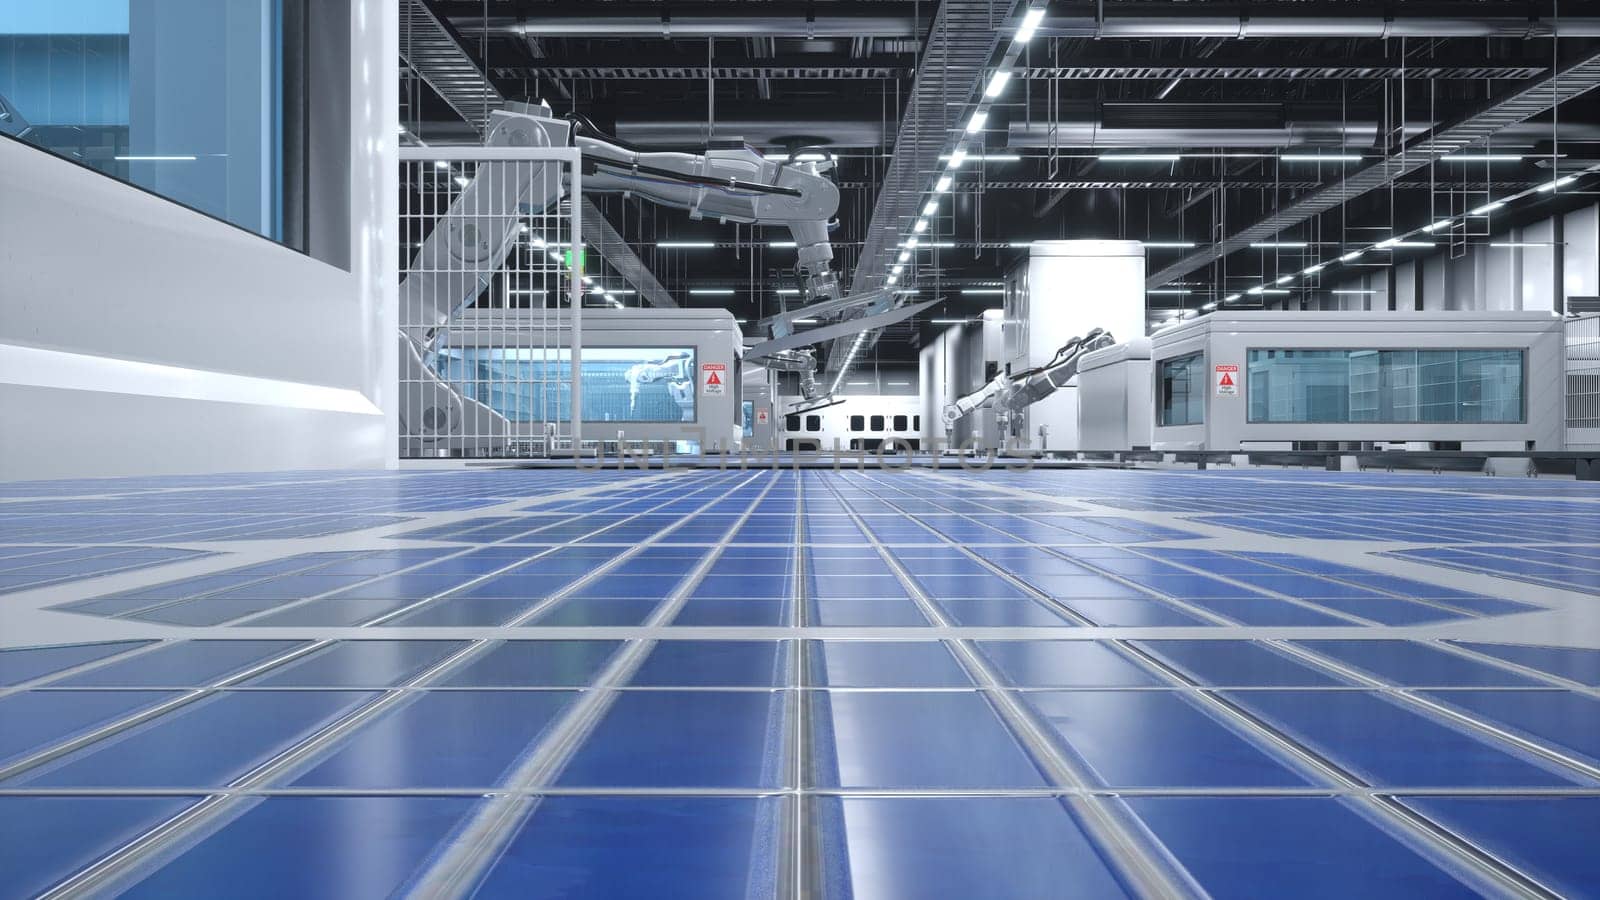 PV cells being moved around facility using assembly lines, close up, 3D render by DCStudio